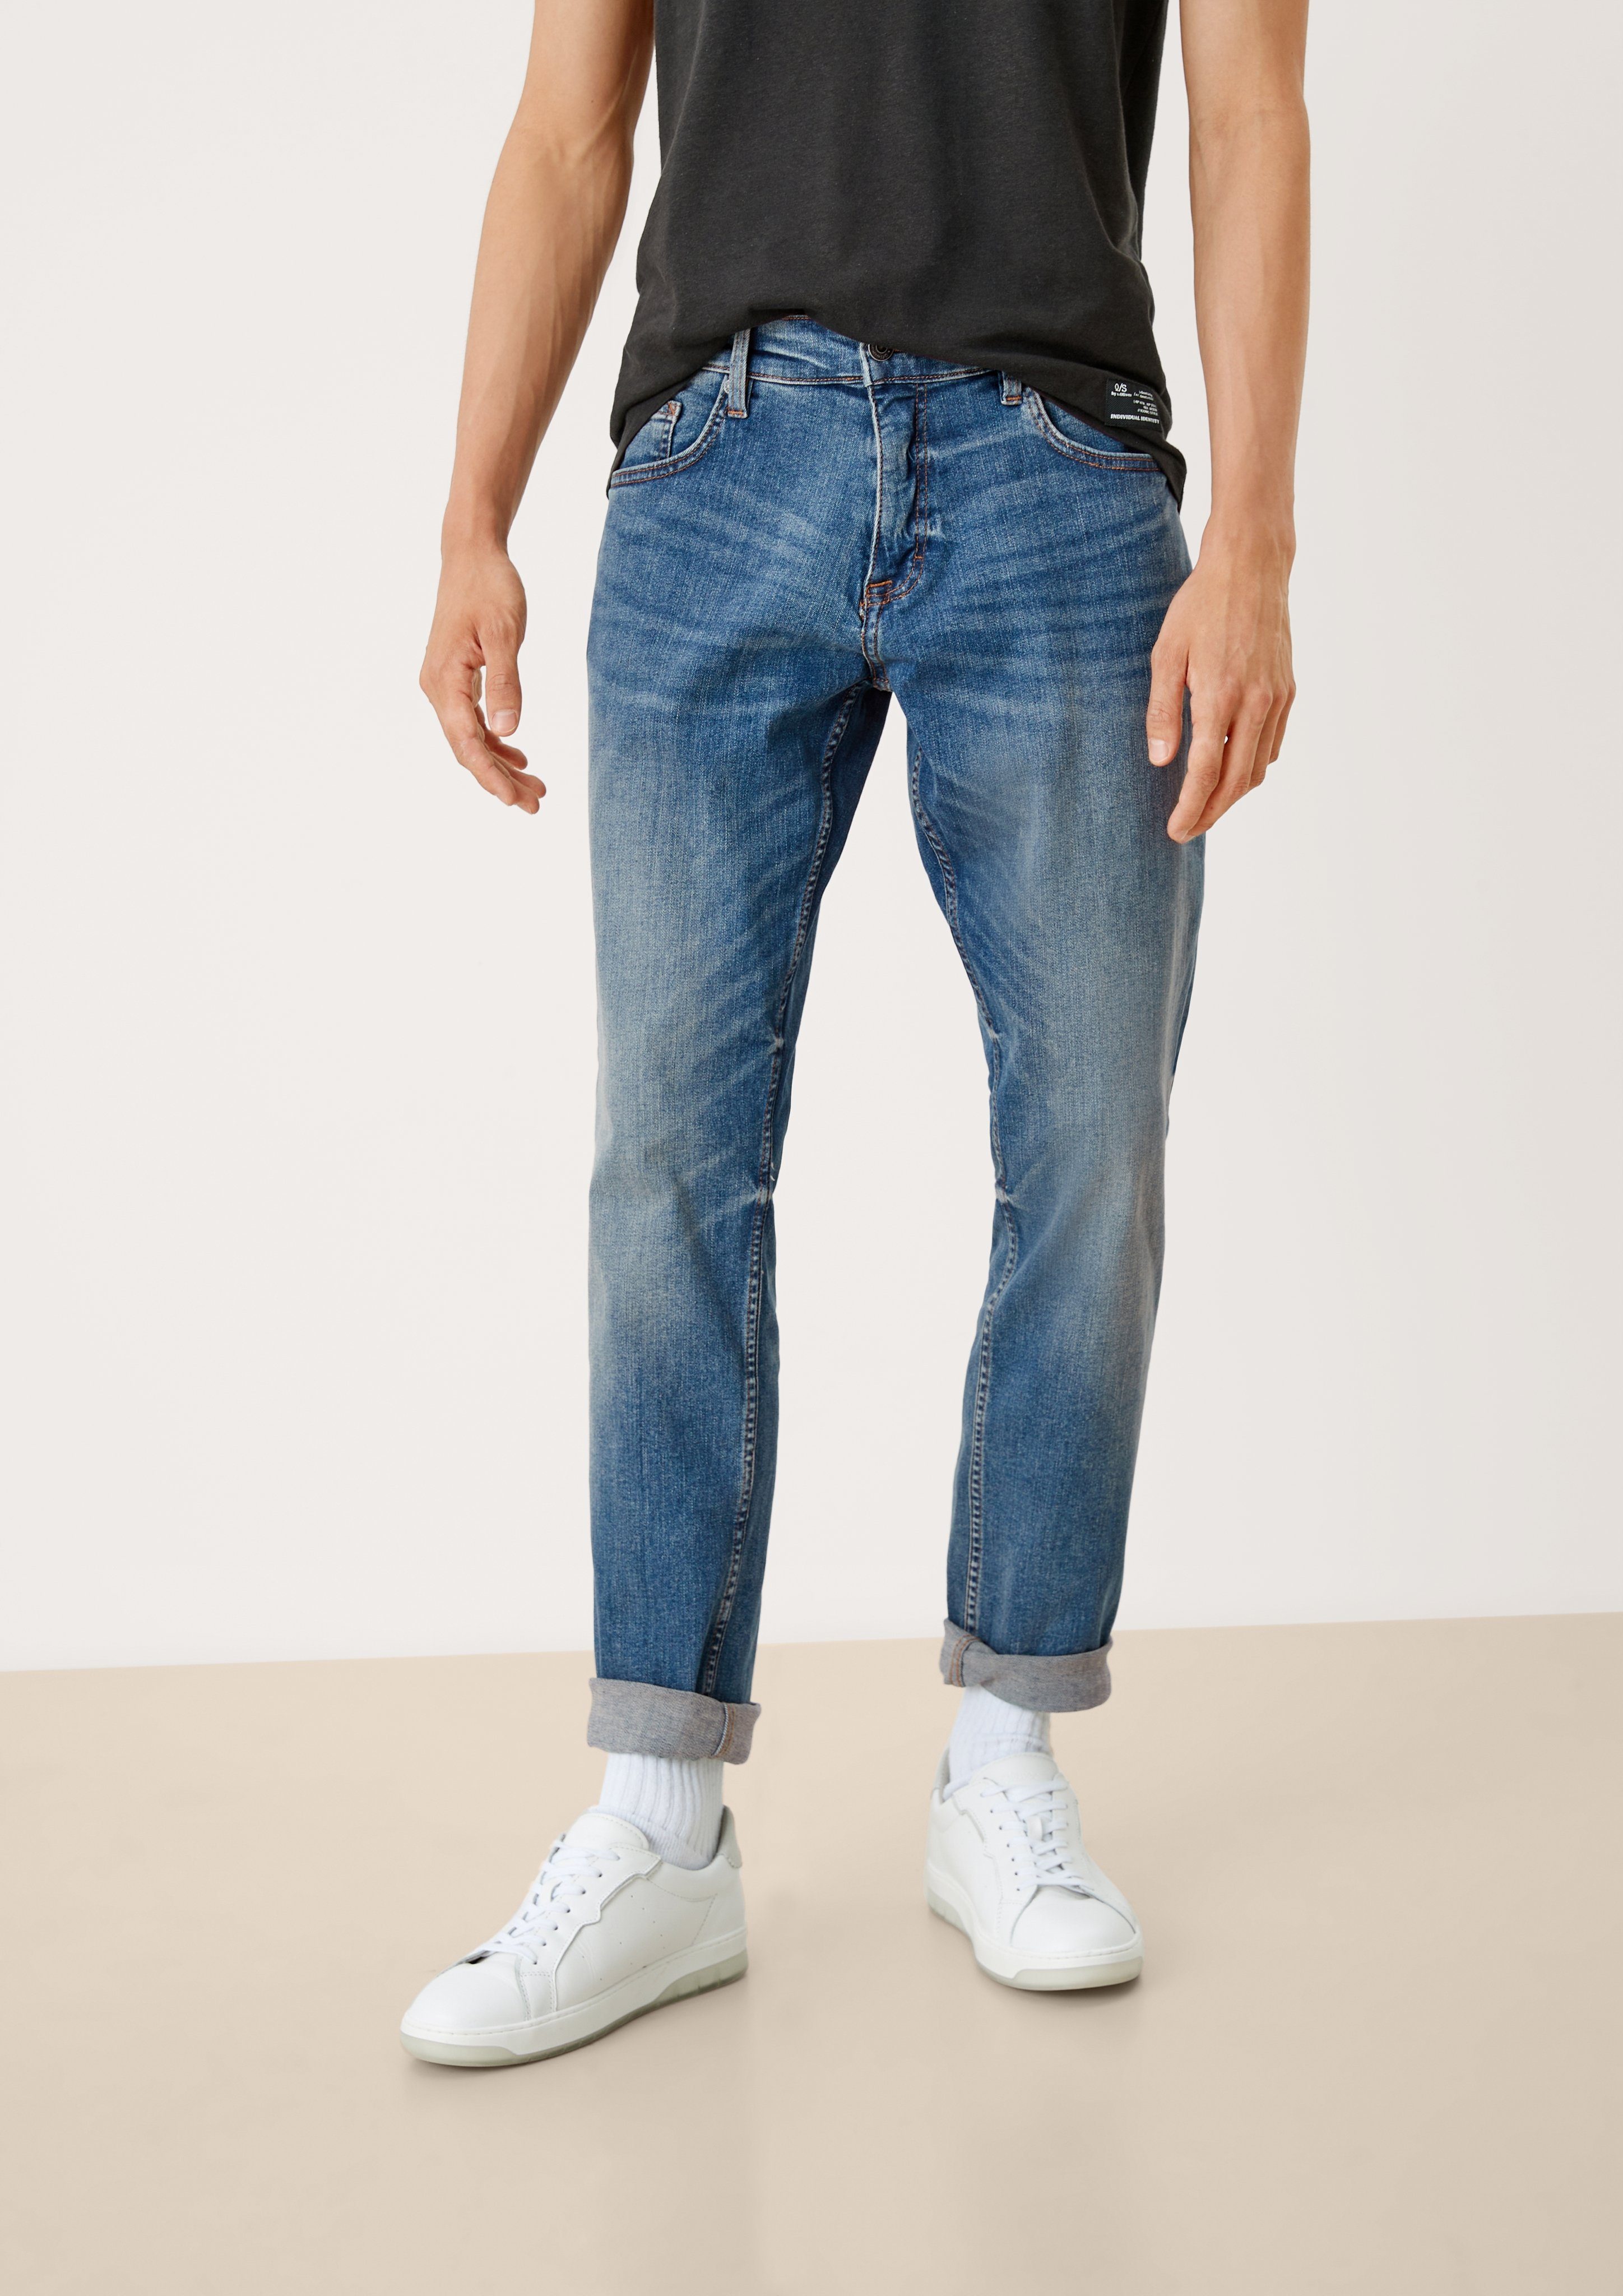 Herren Jeans Q/S by s.Oliver 5-Pocket-Jeans Regular: Straight leg-Jeans Waschung